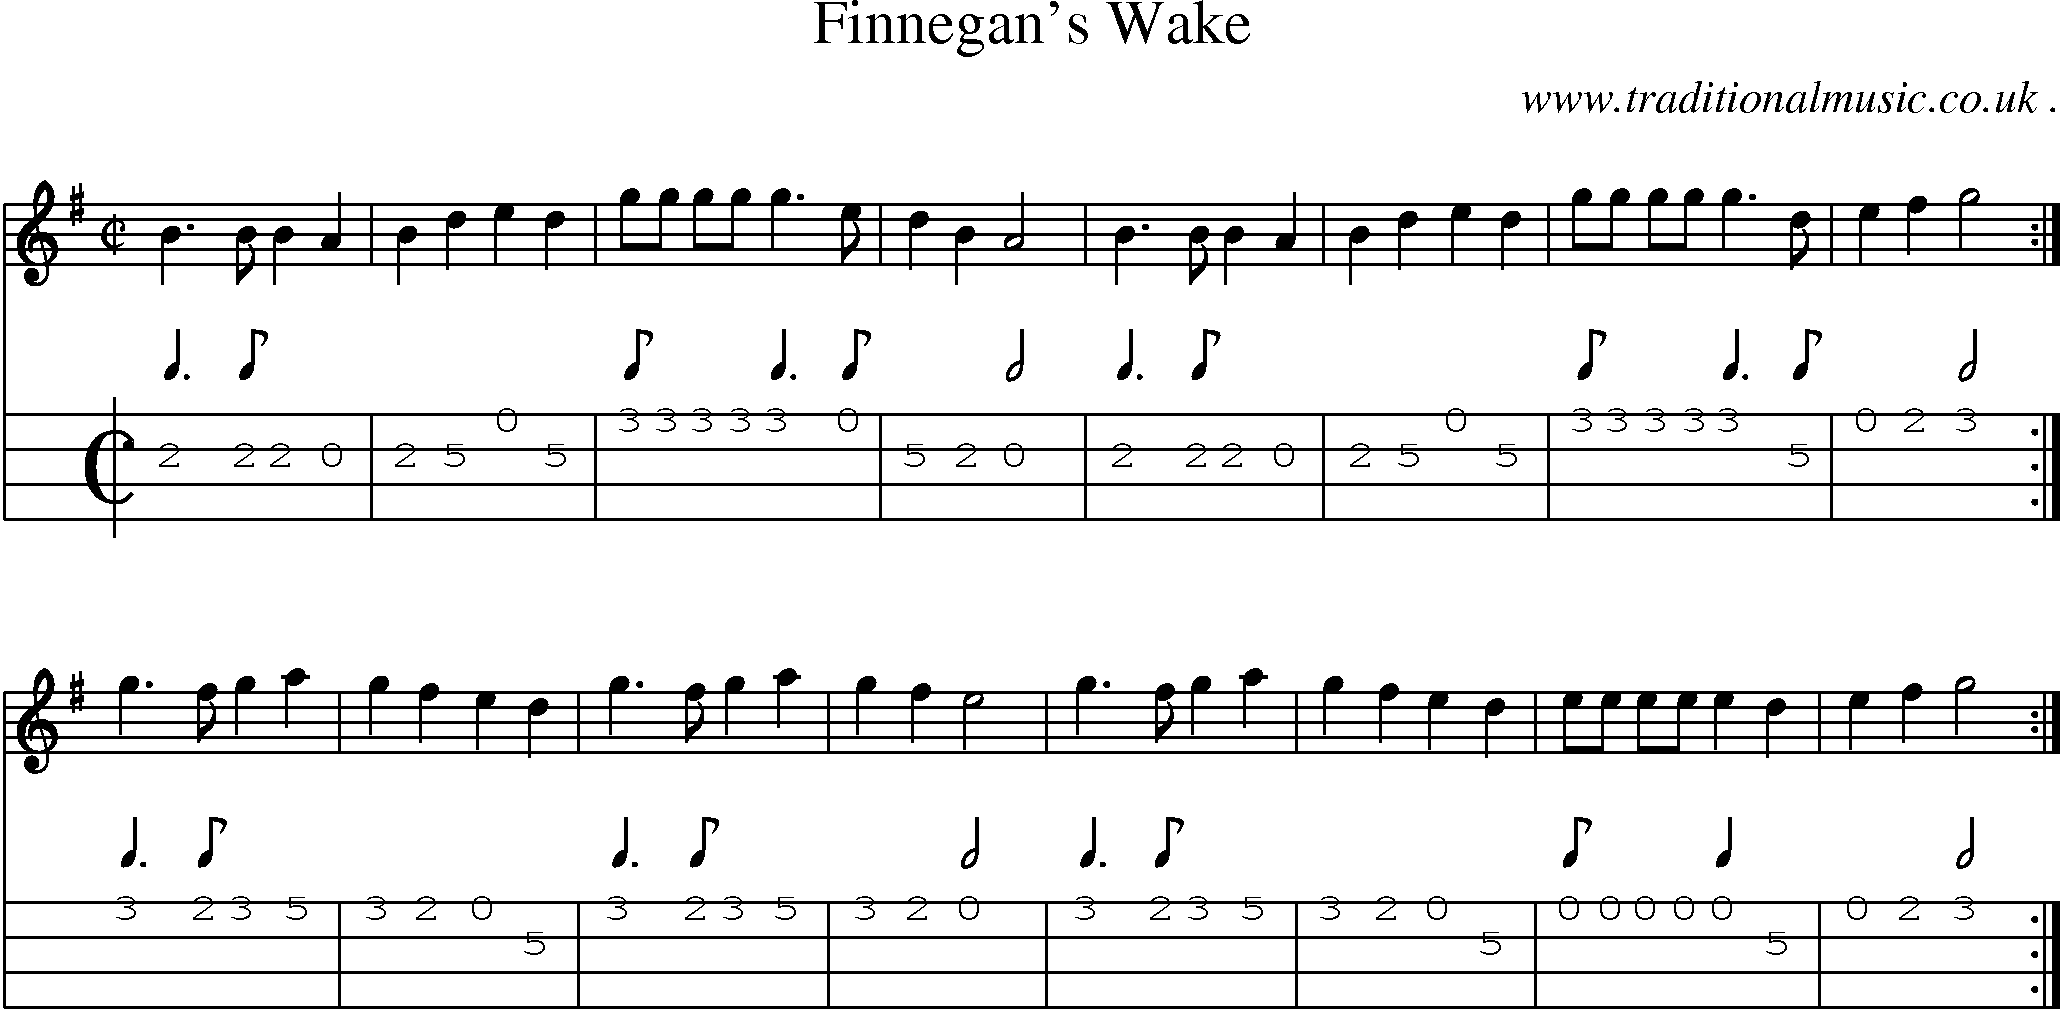 Music Score and Guitar Tabs for Finnegans Wake